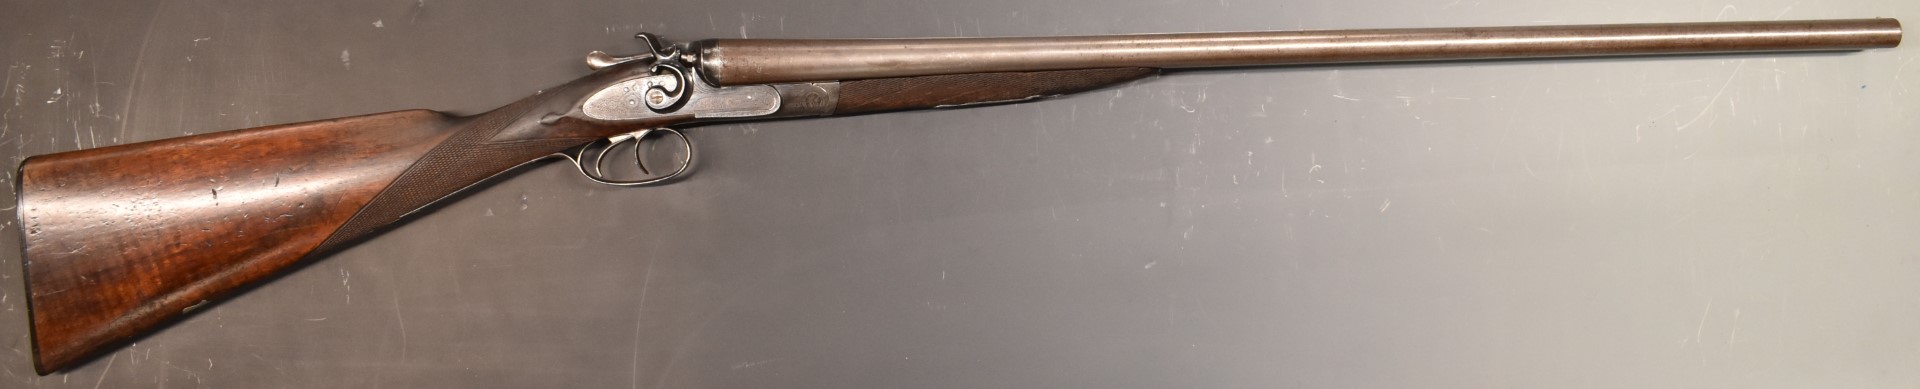 English 12 bore side by side hammer action shotgun with engraved locks, stylised hammers, trigger - Image 2 of 11